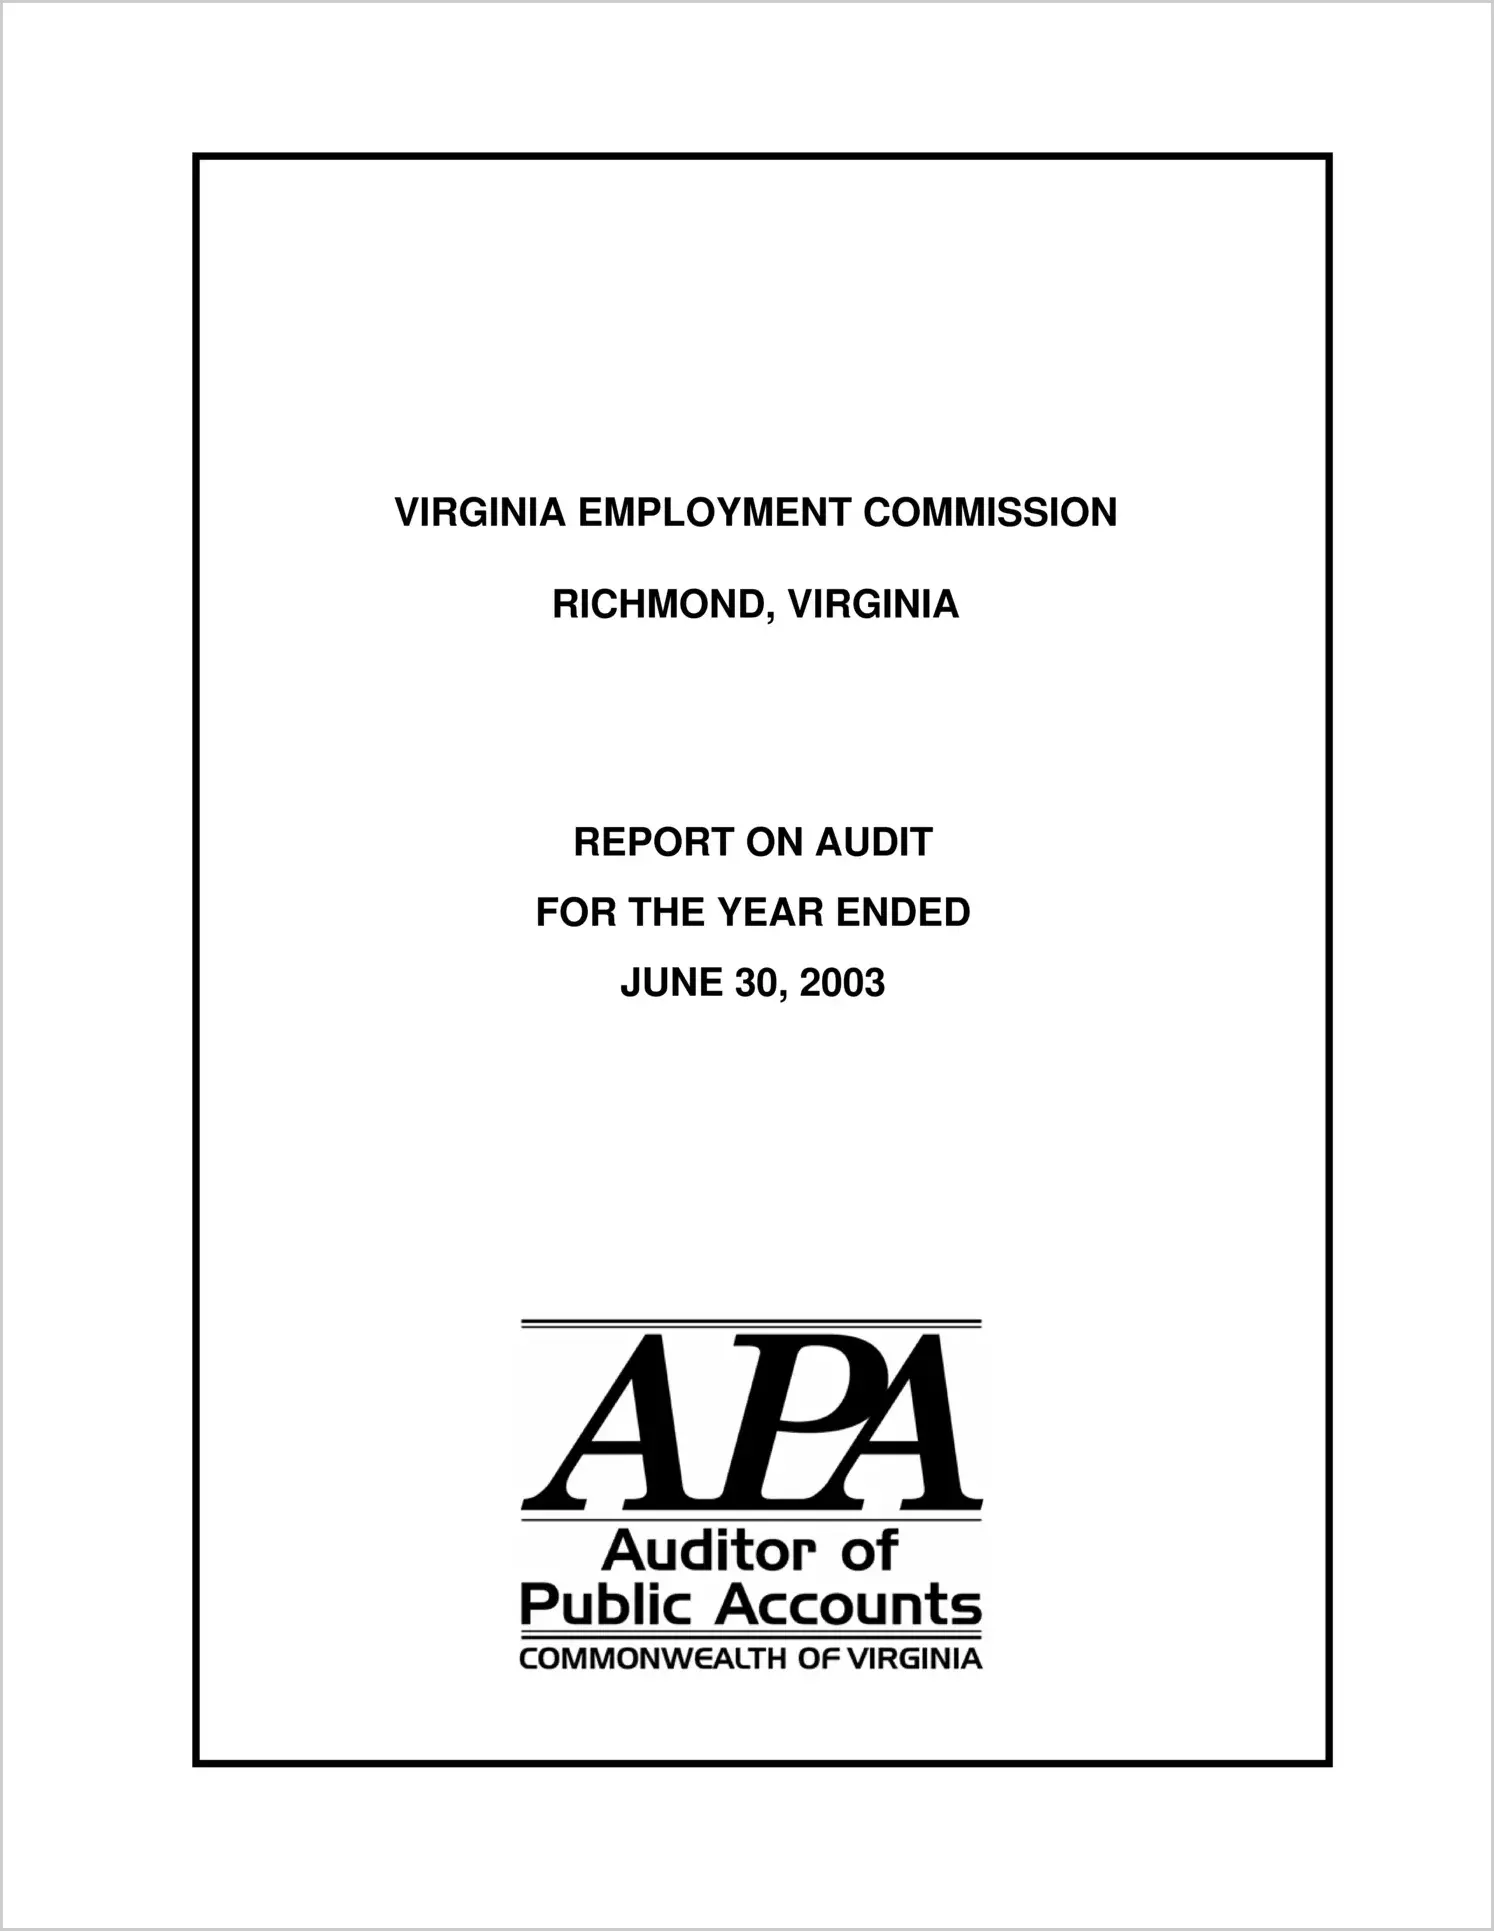 Virginia Employment Commission for the year ended June 30, 2003